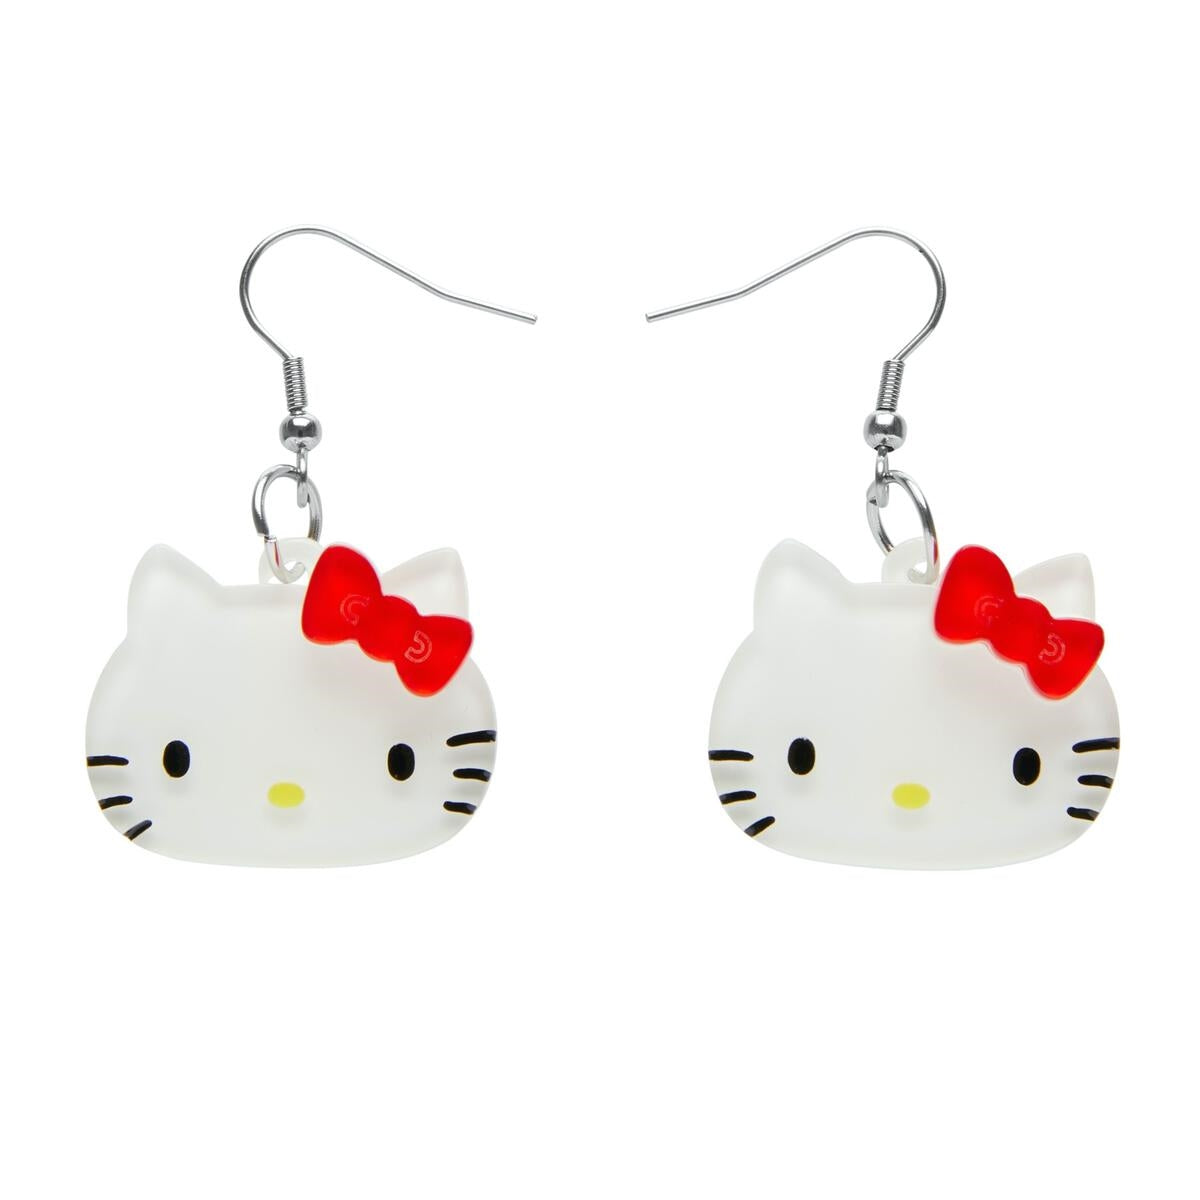 Aggregate more than 176 hello kitty dangle earrings best